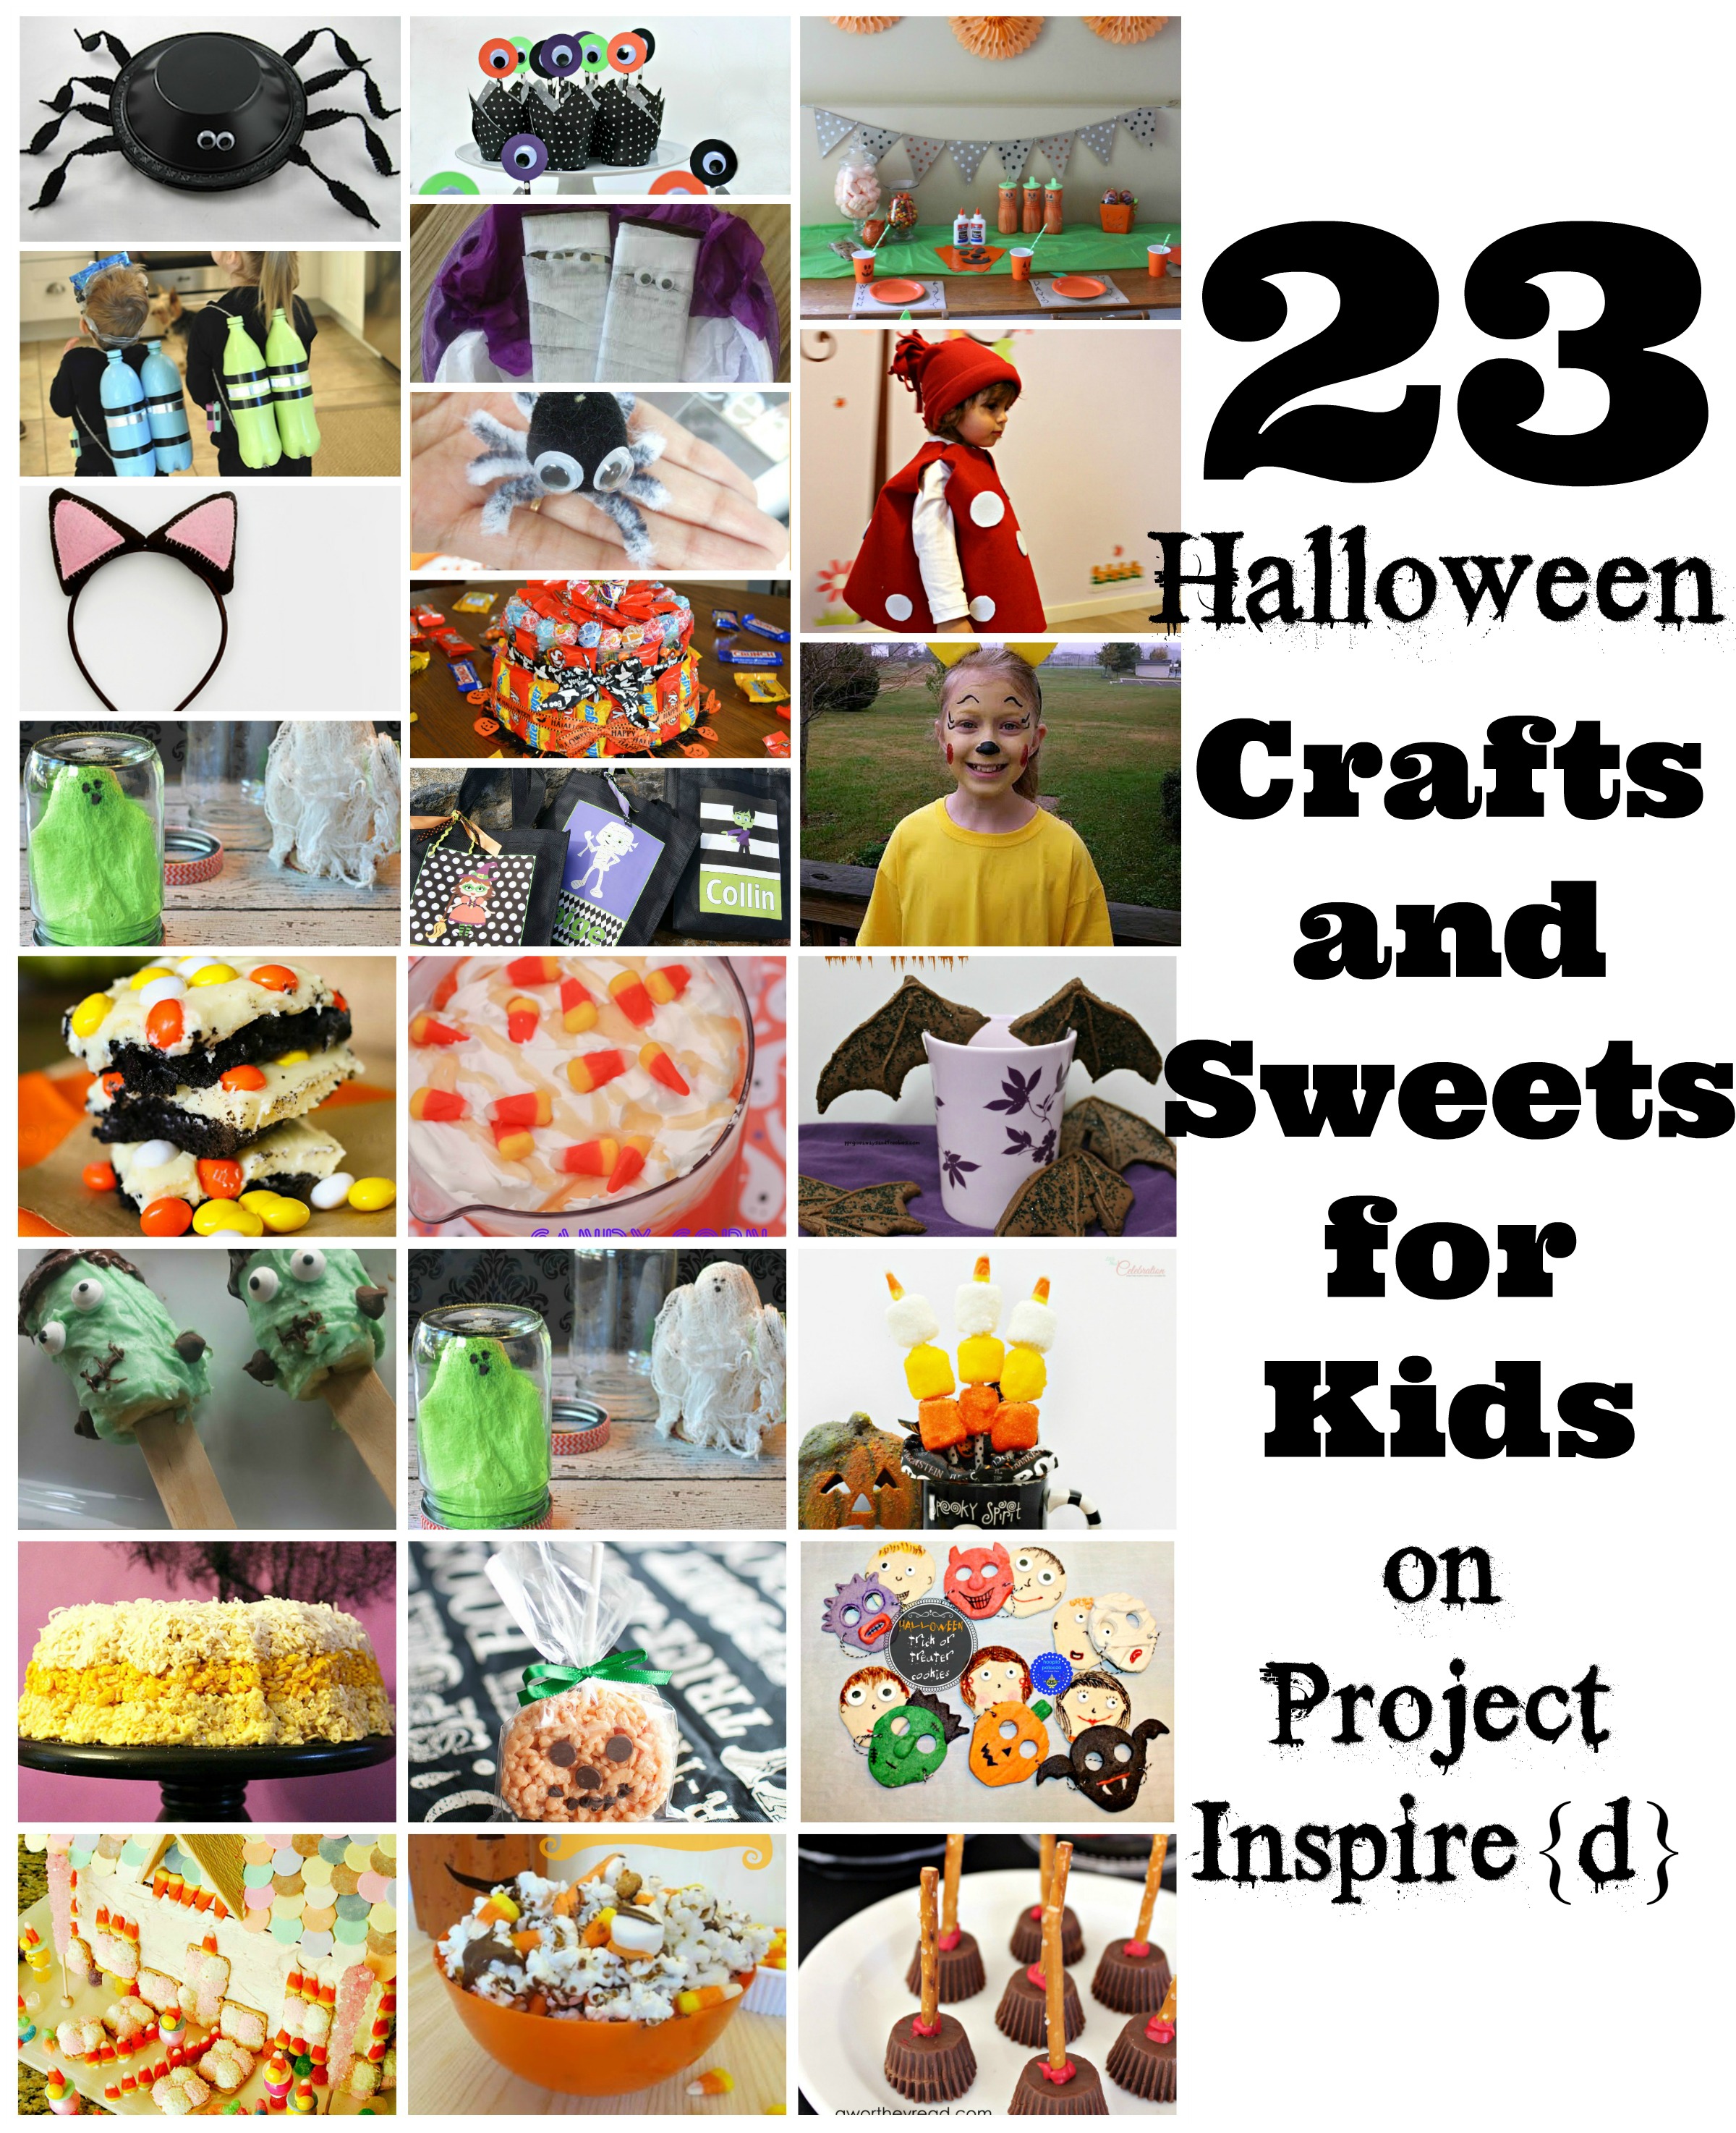 PI Features: Halloween Ideas for Kids